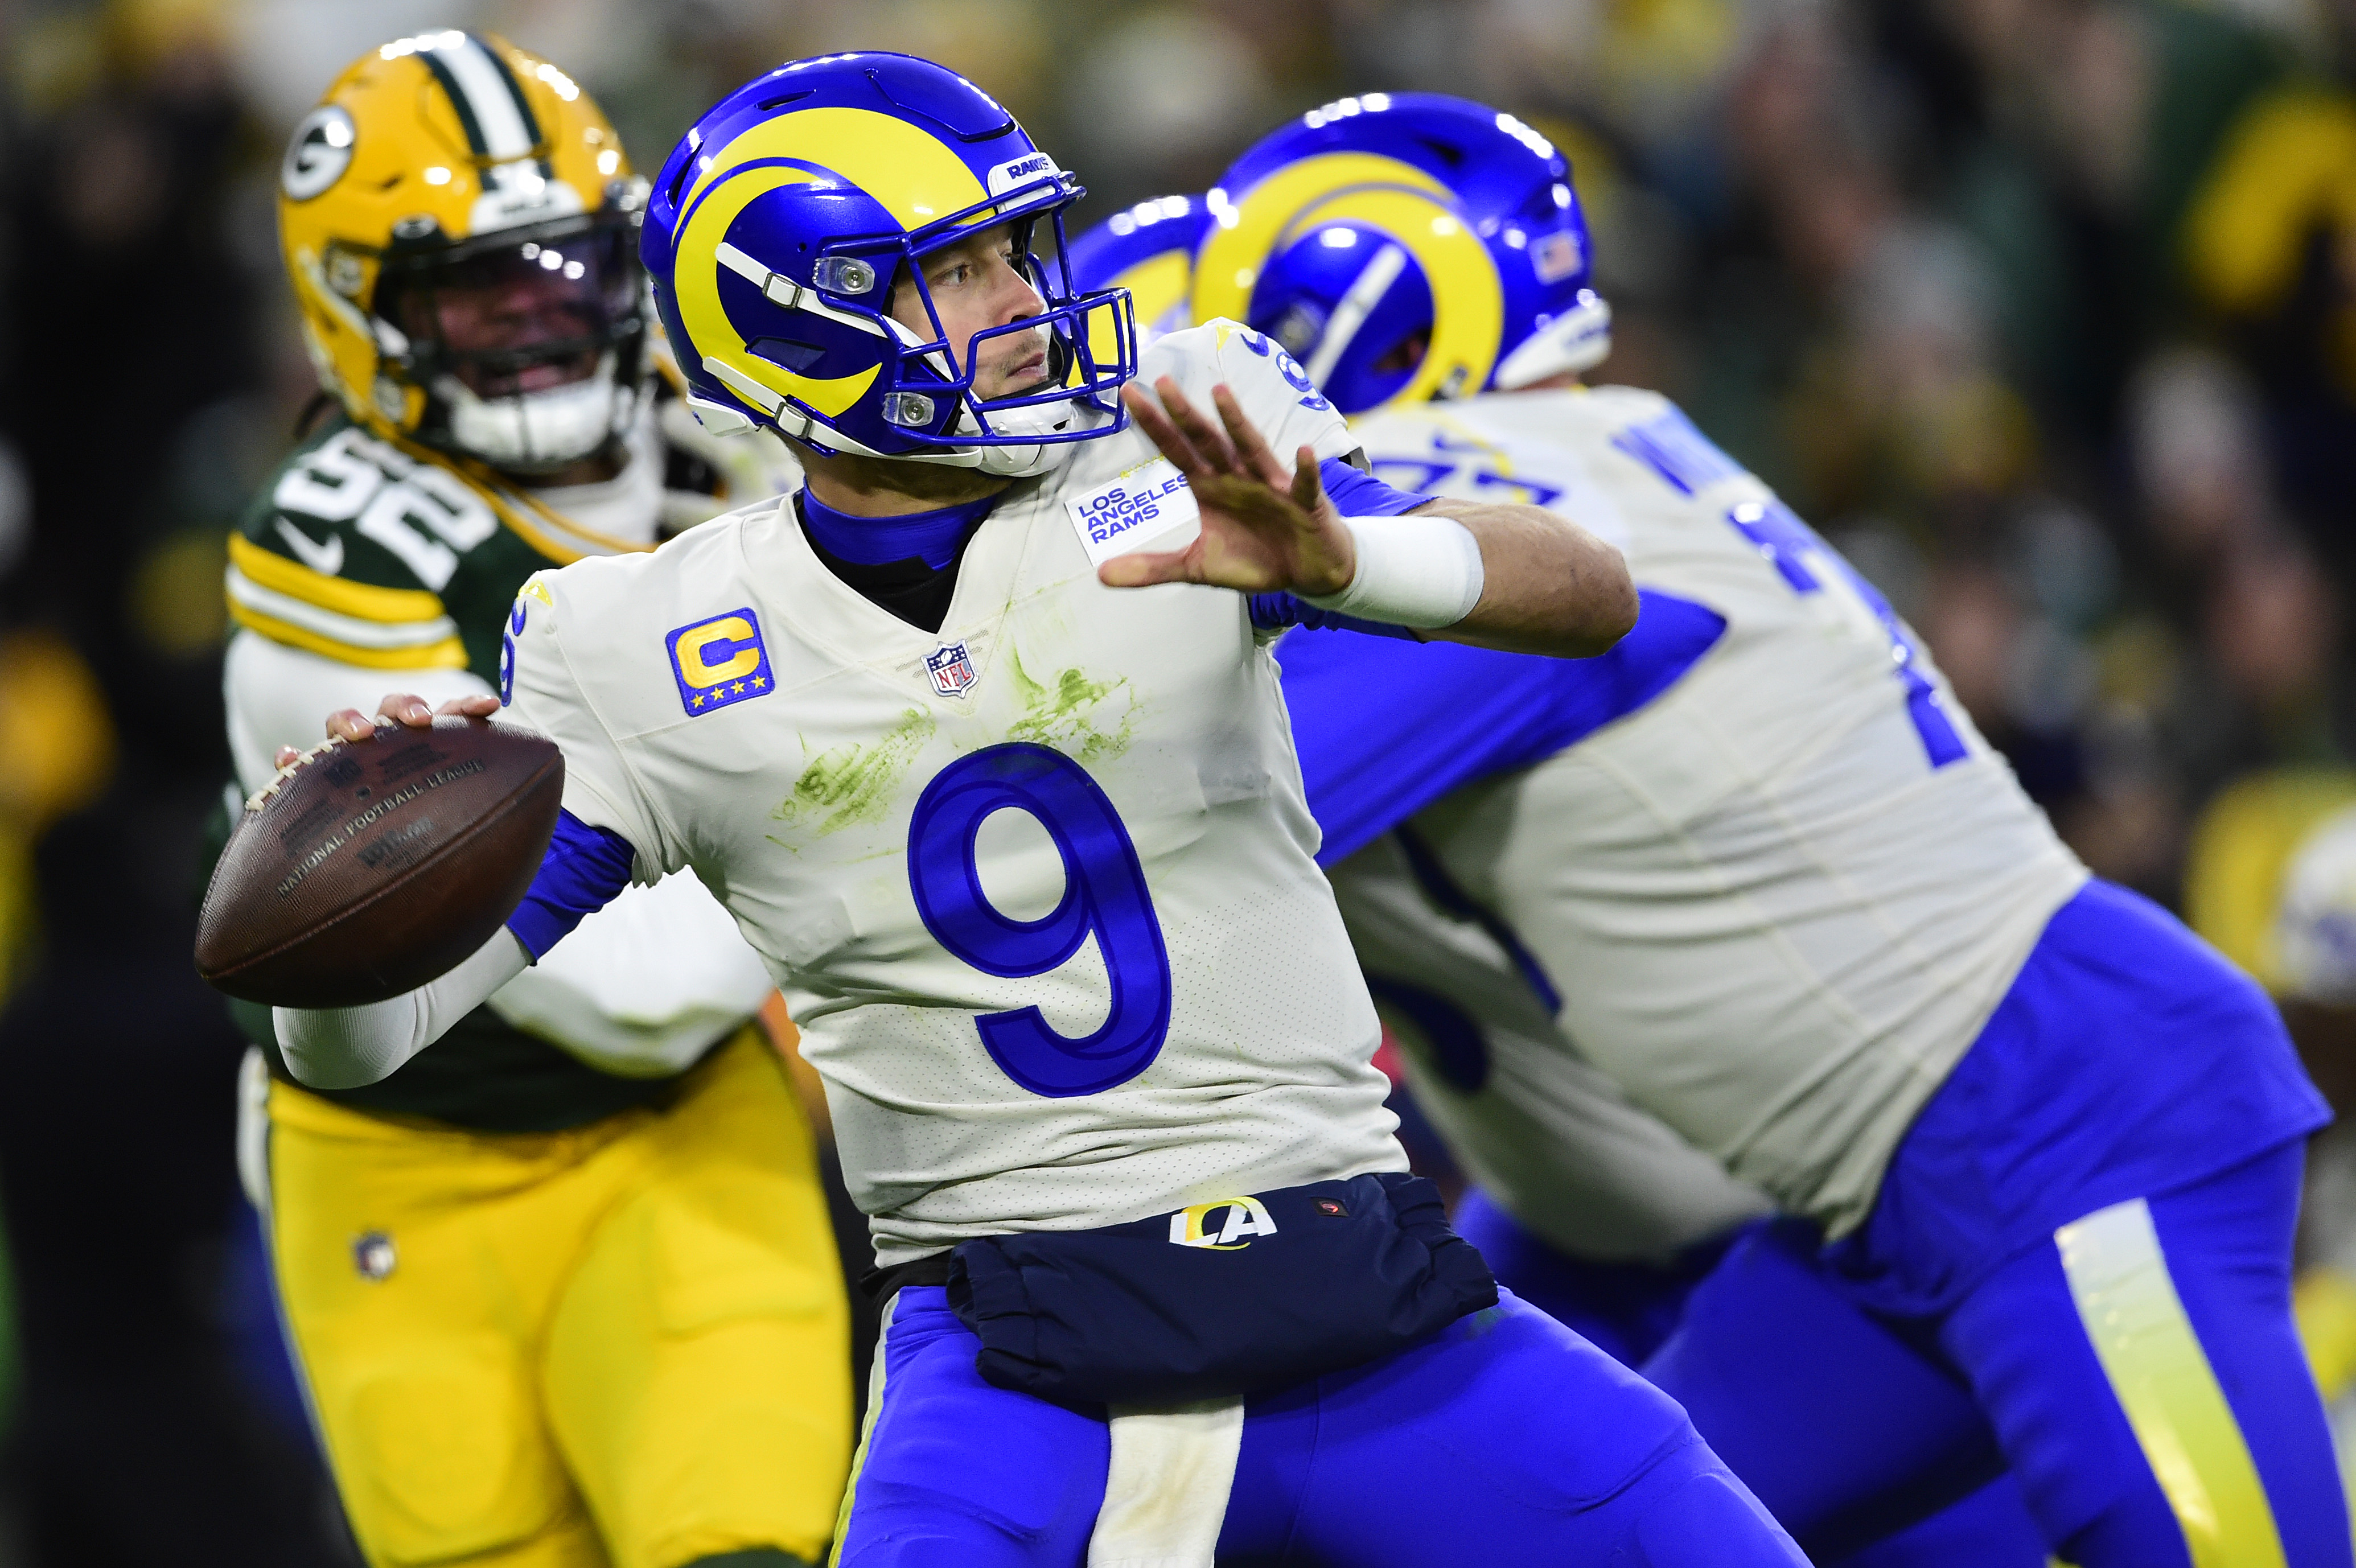 Matthew Stafford leads the Rams against the Cardinals